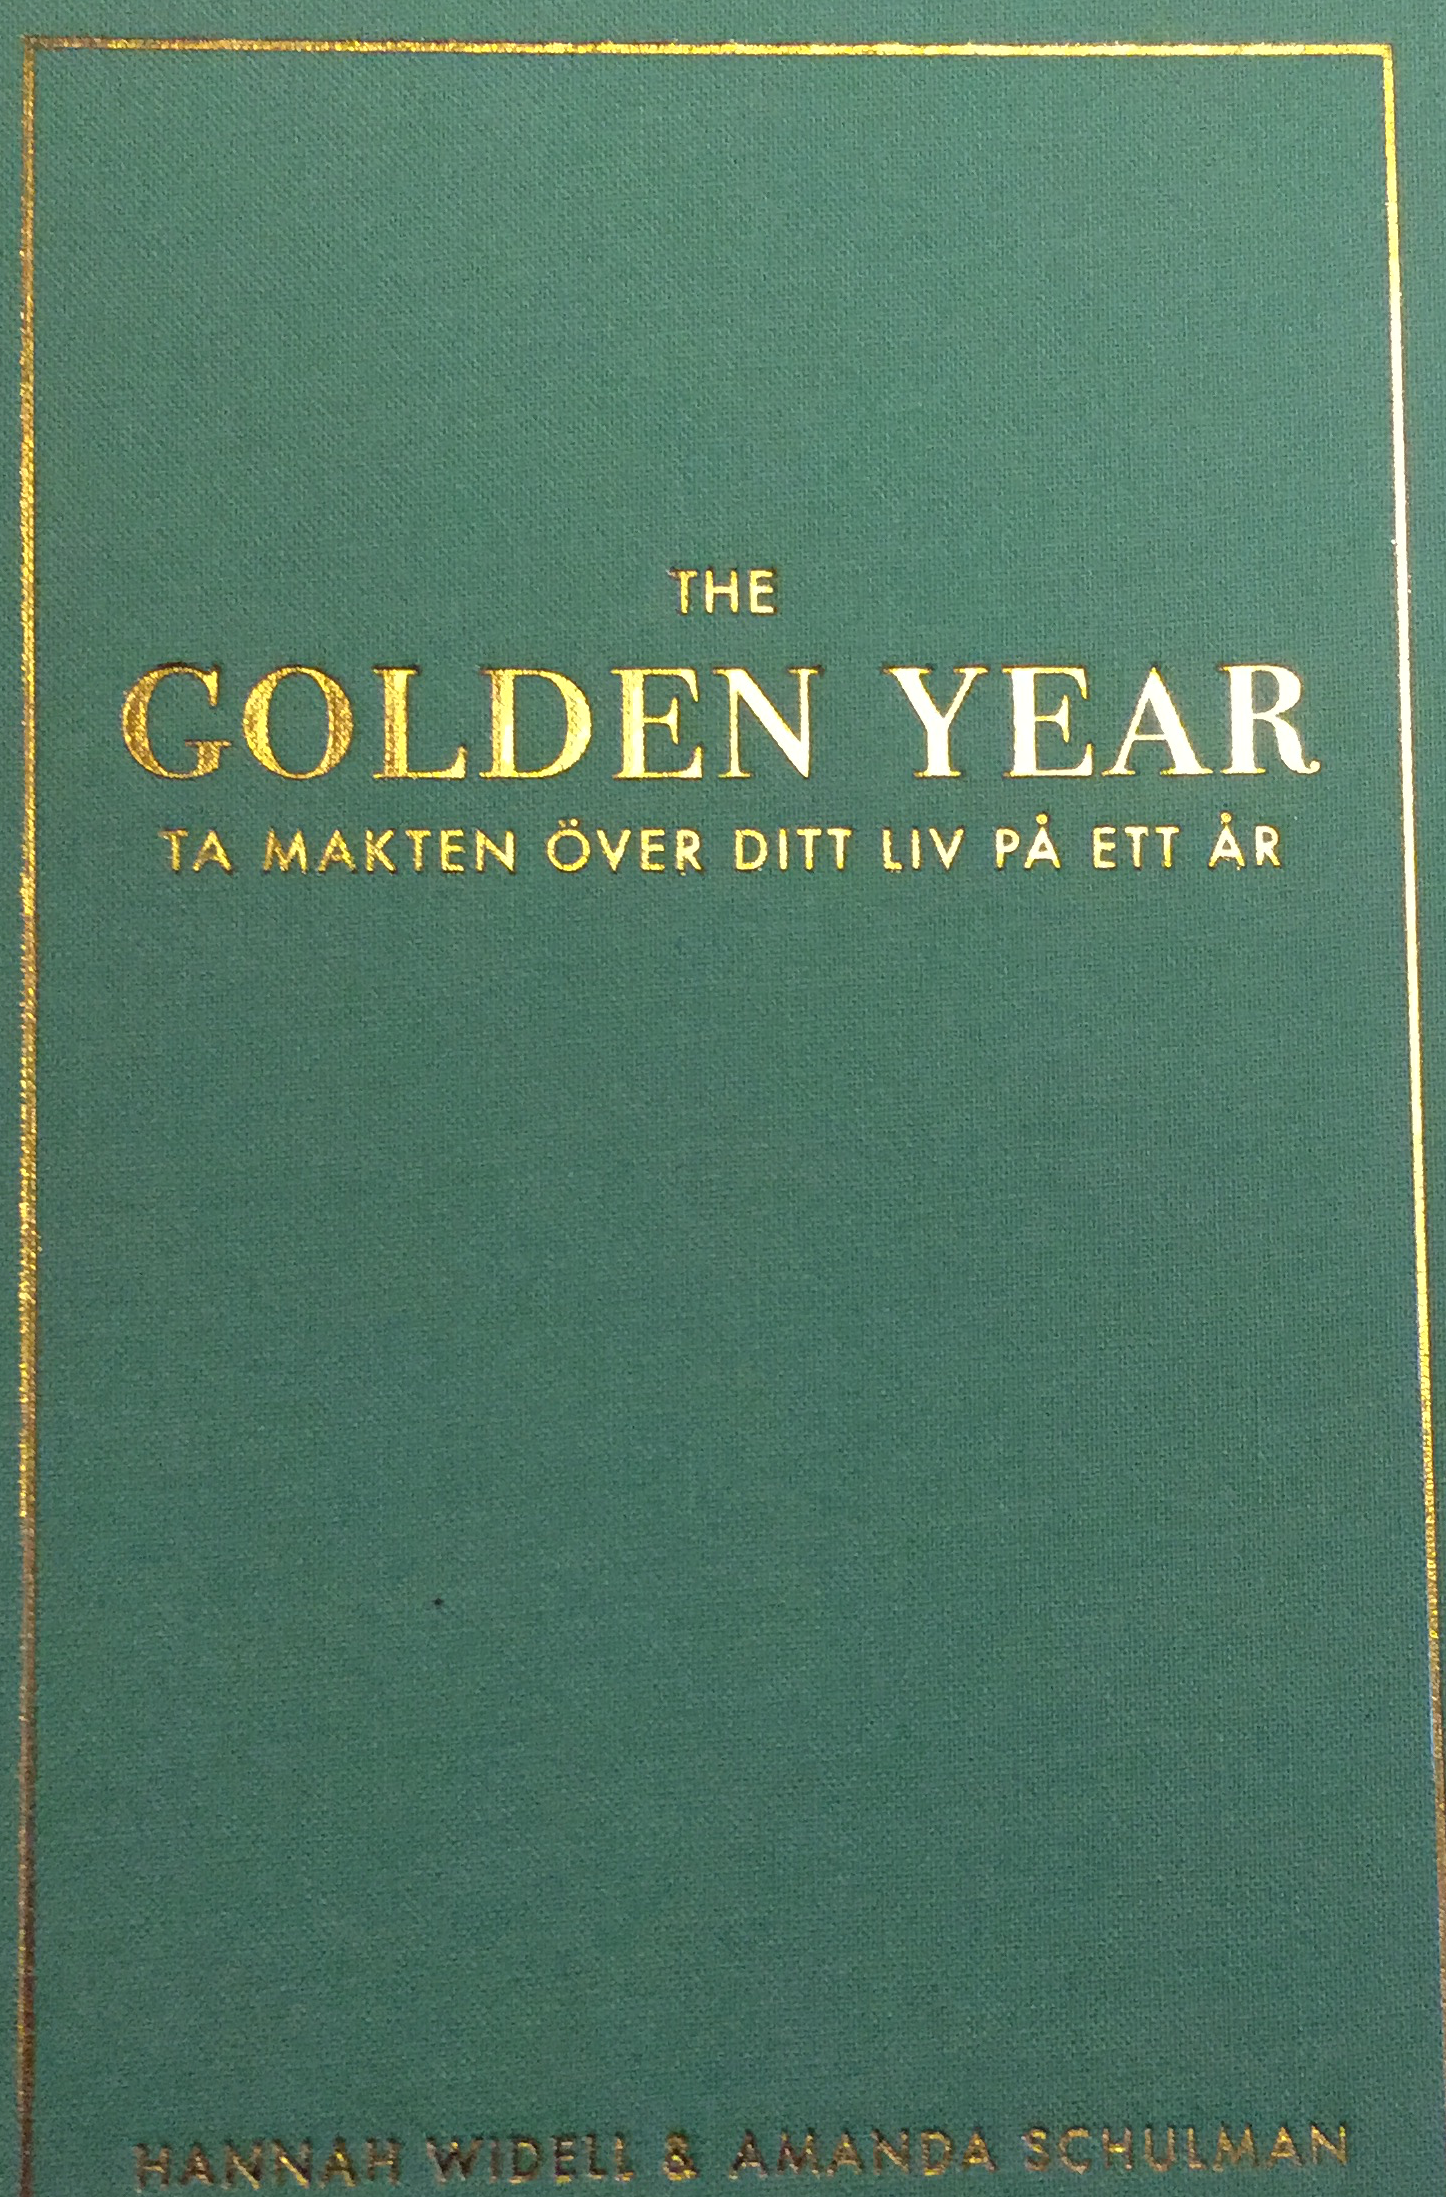 The golden year